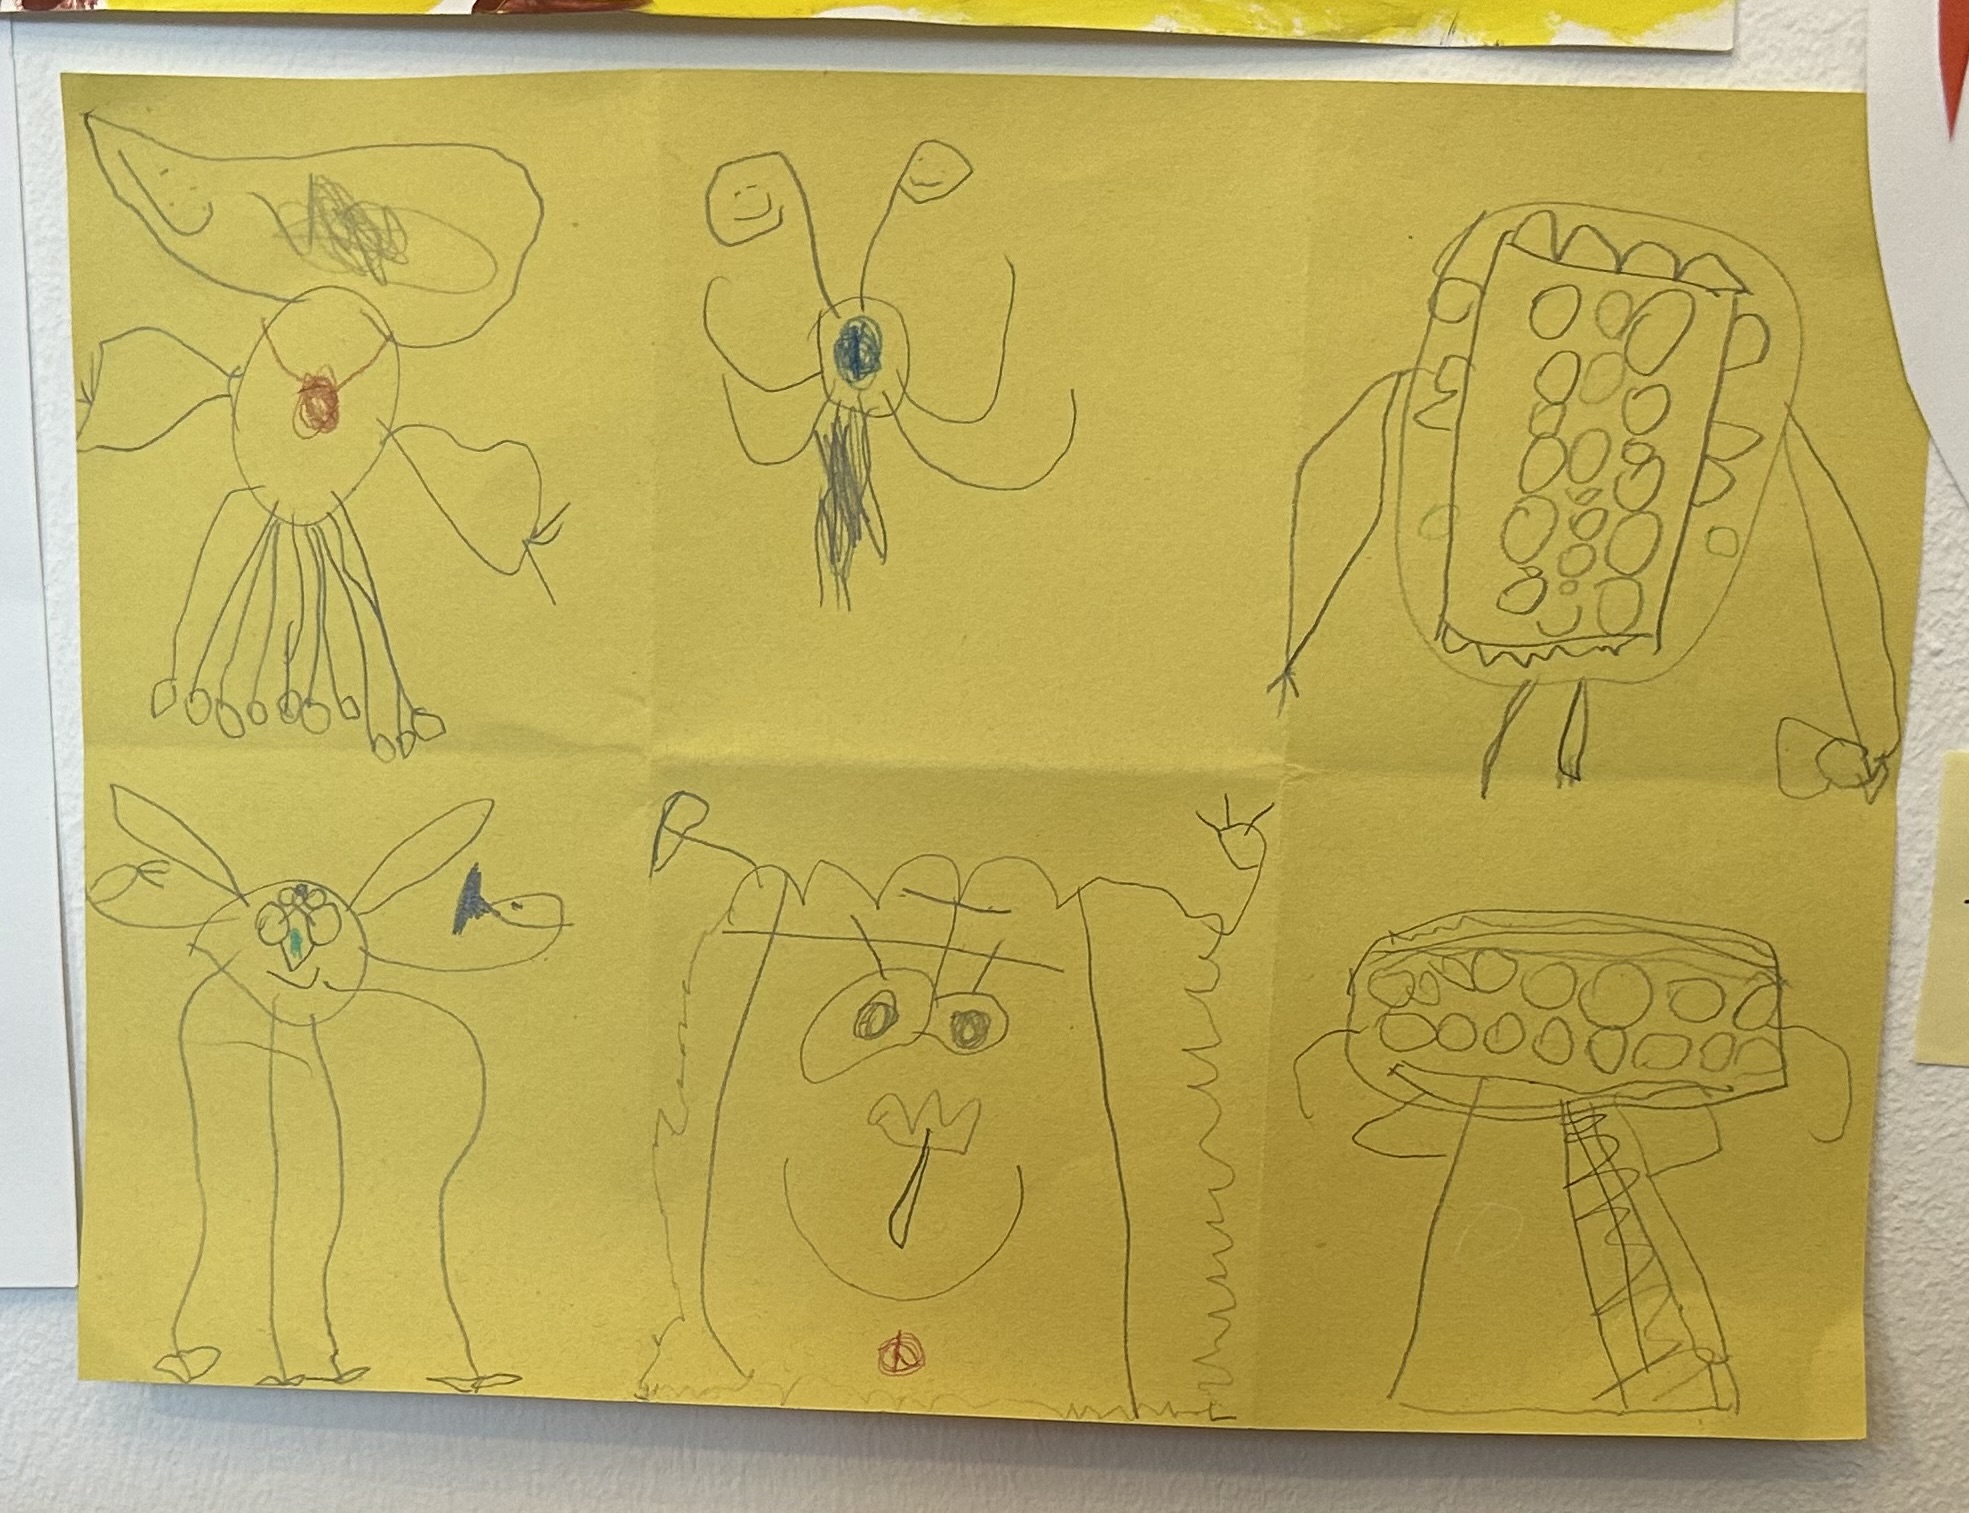 stencil drawings on yellow folded paper divided into 6 part to represent 6 different creatures made by a child